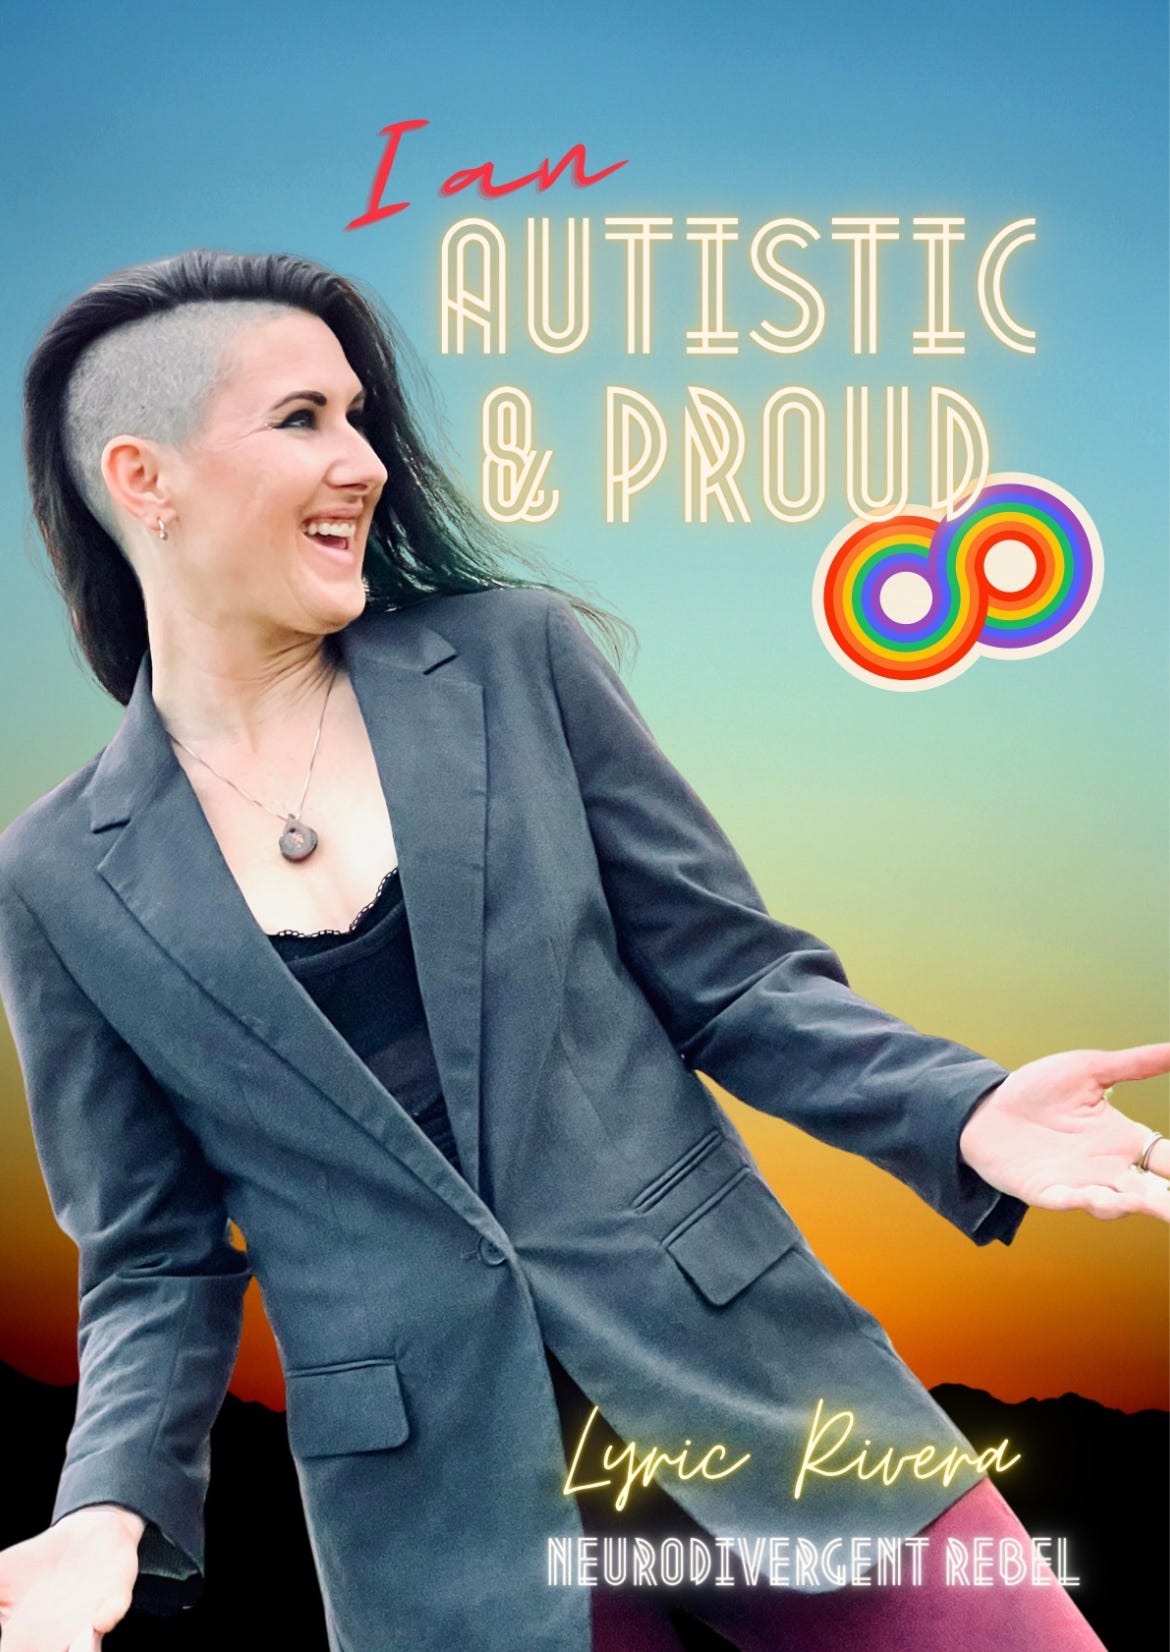 Photo of Lyric in a grey blazer, black undershirt, and red pants. They have their medium-length hair down and are smiling to the side in front of a bold orange and teal sunset. On the image is the text that reads: I AM Autistic and Proud - Lyric Rivera, NeuroDivergent Rebel.